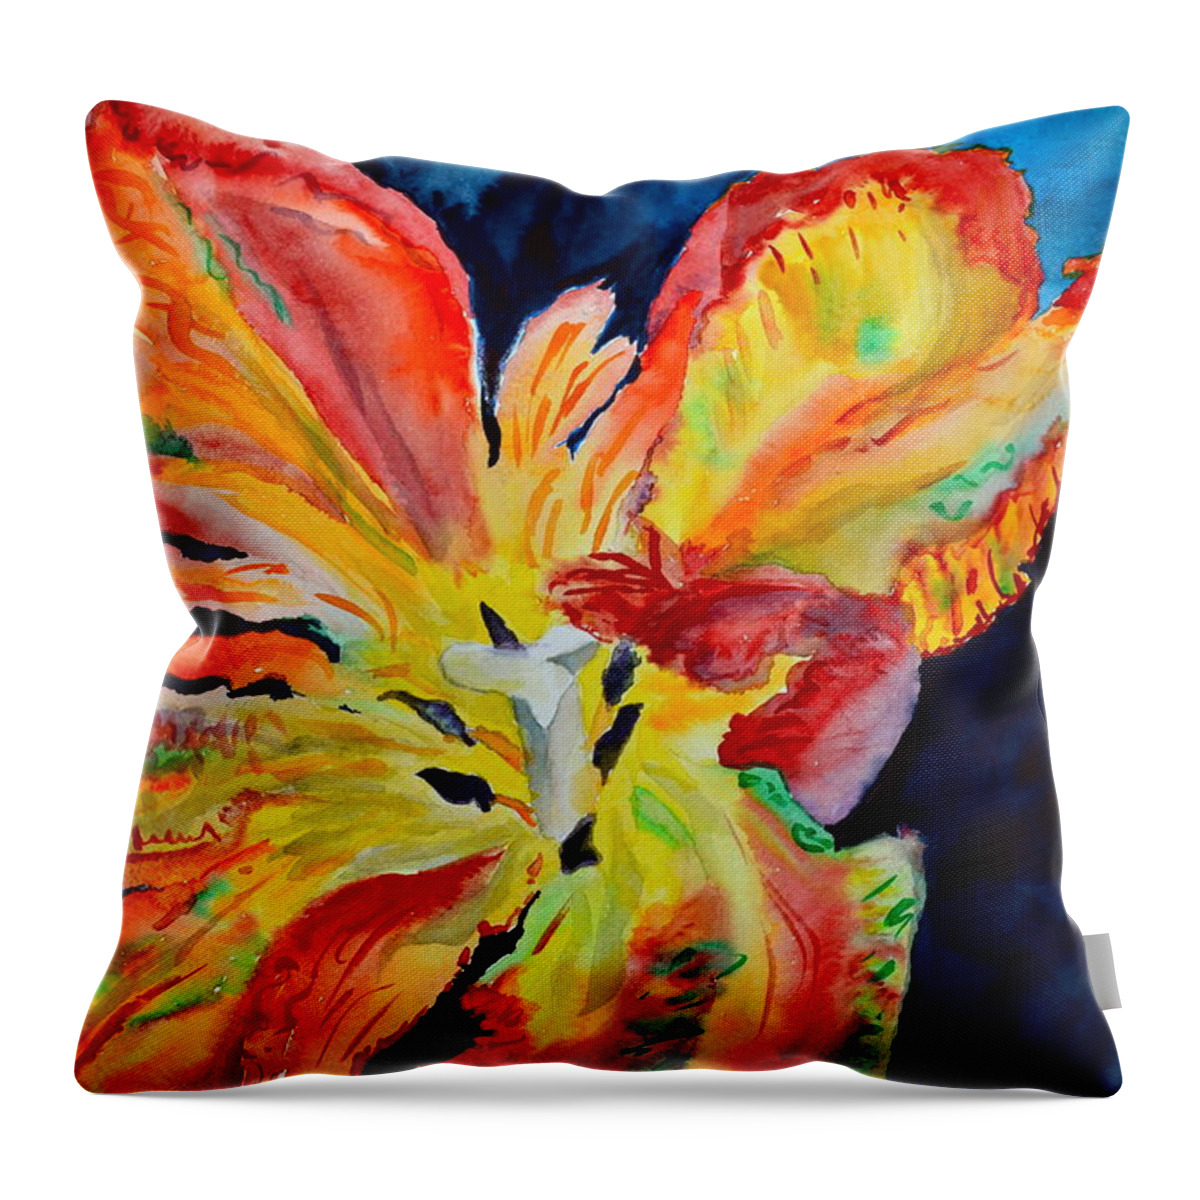 Parrot Tulip Throw Pillow featuring the painting Fireworks by Beverley Harper Tinsley